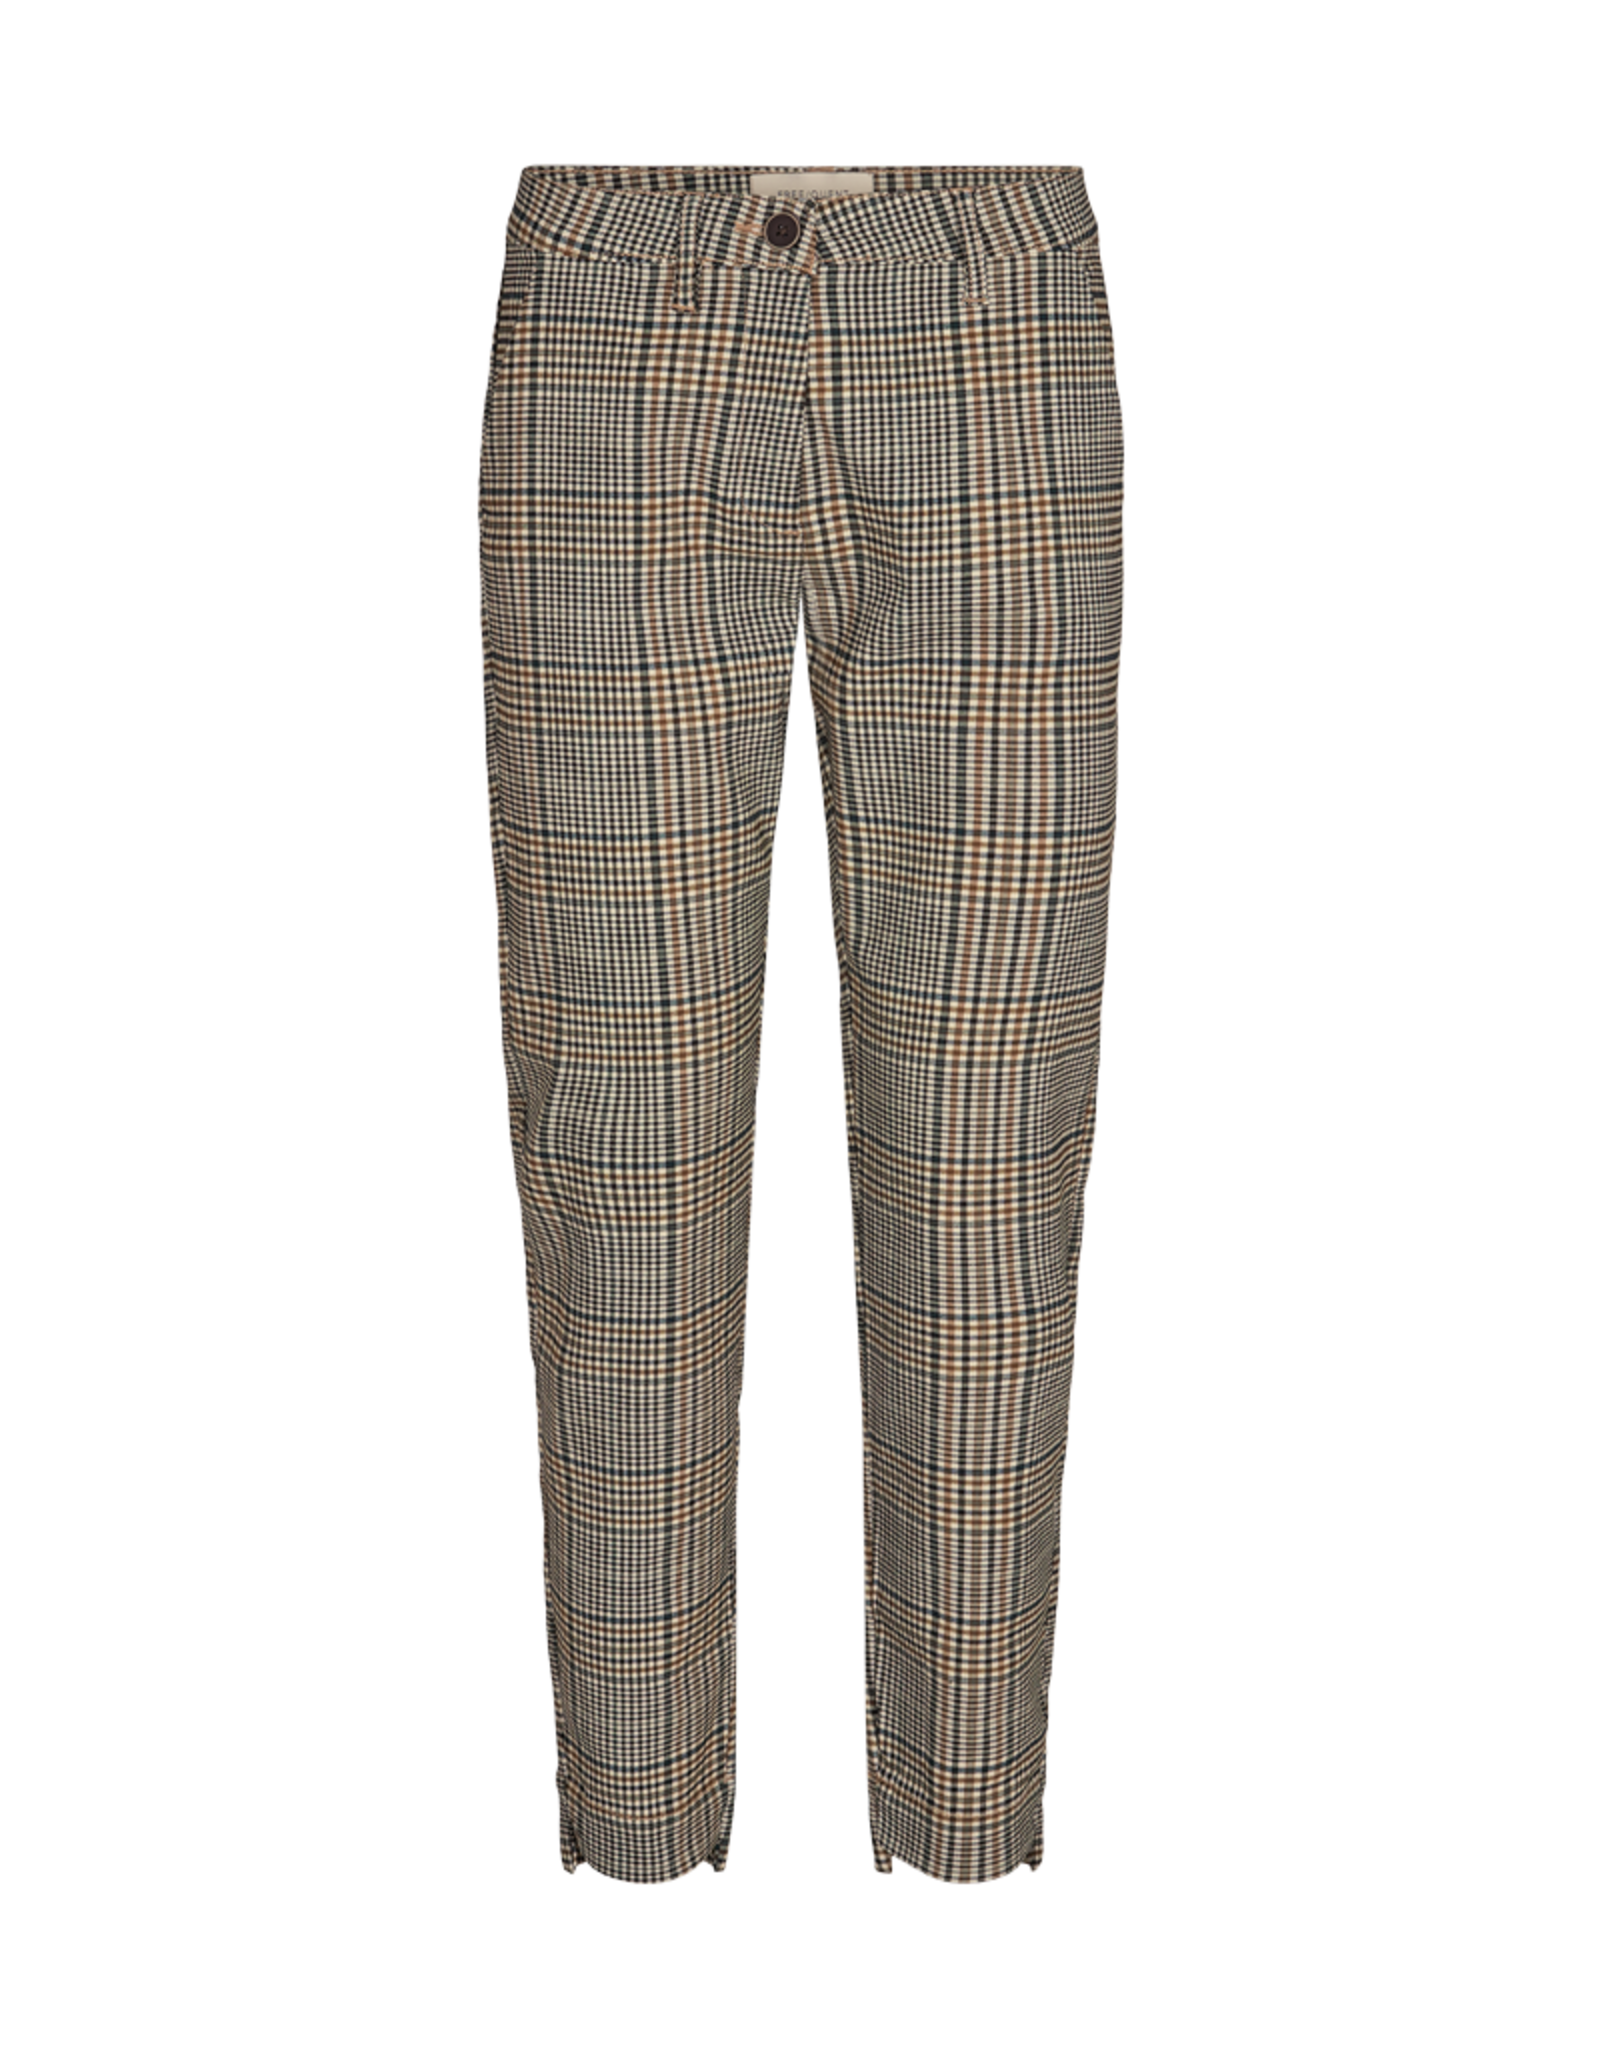 FREEQUENT Rex ankle pant check4